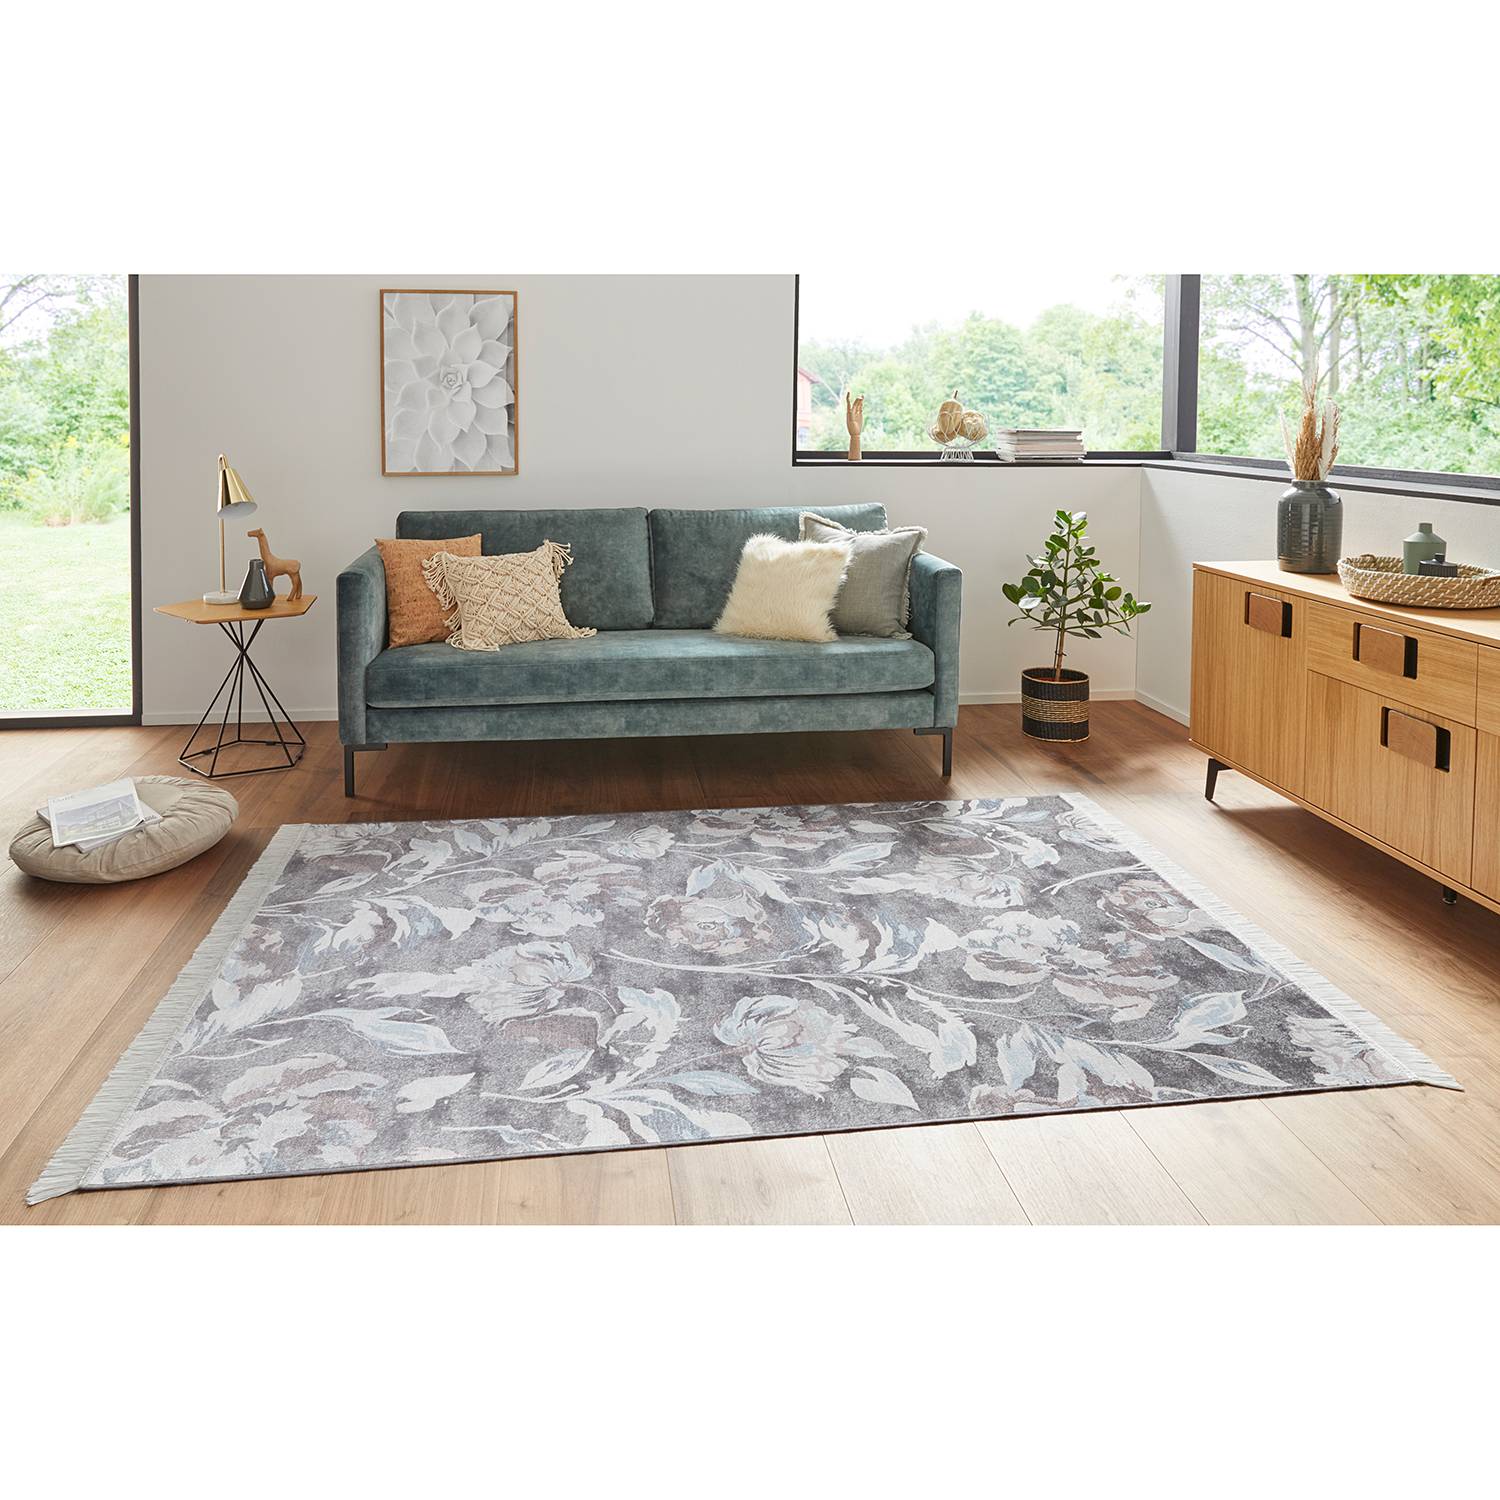 Image of Tapis Contemporary Flowers 000000001000234706